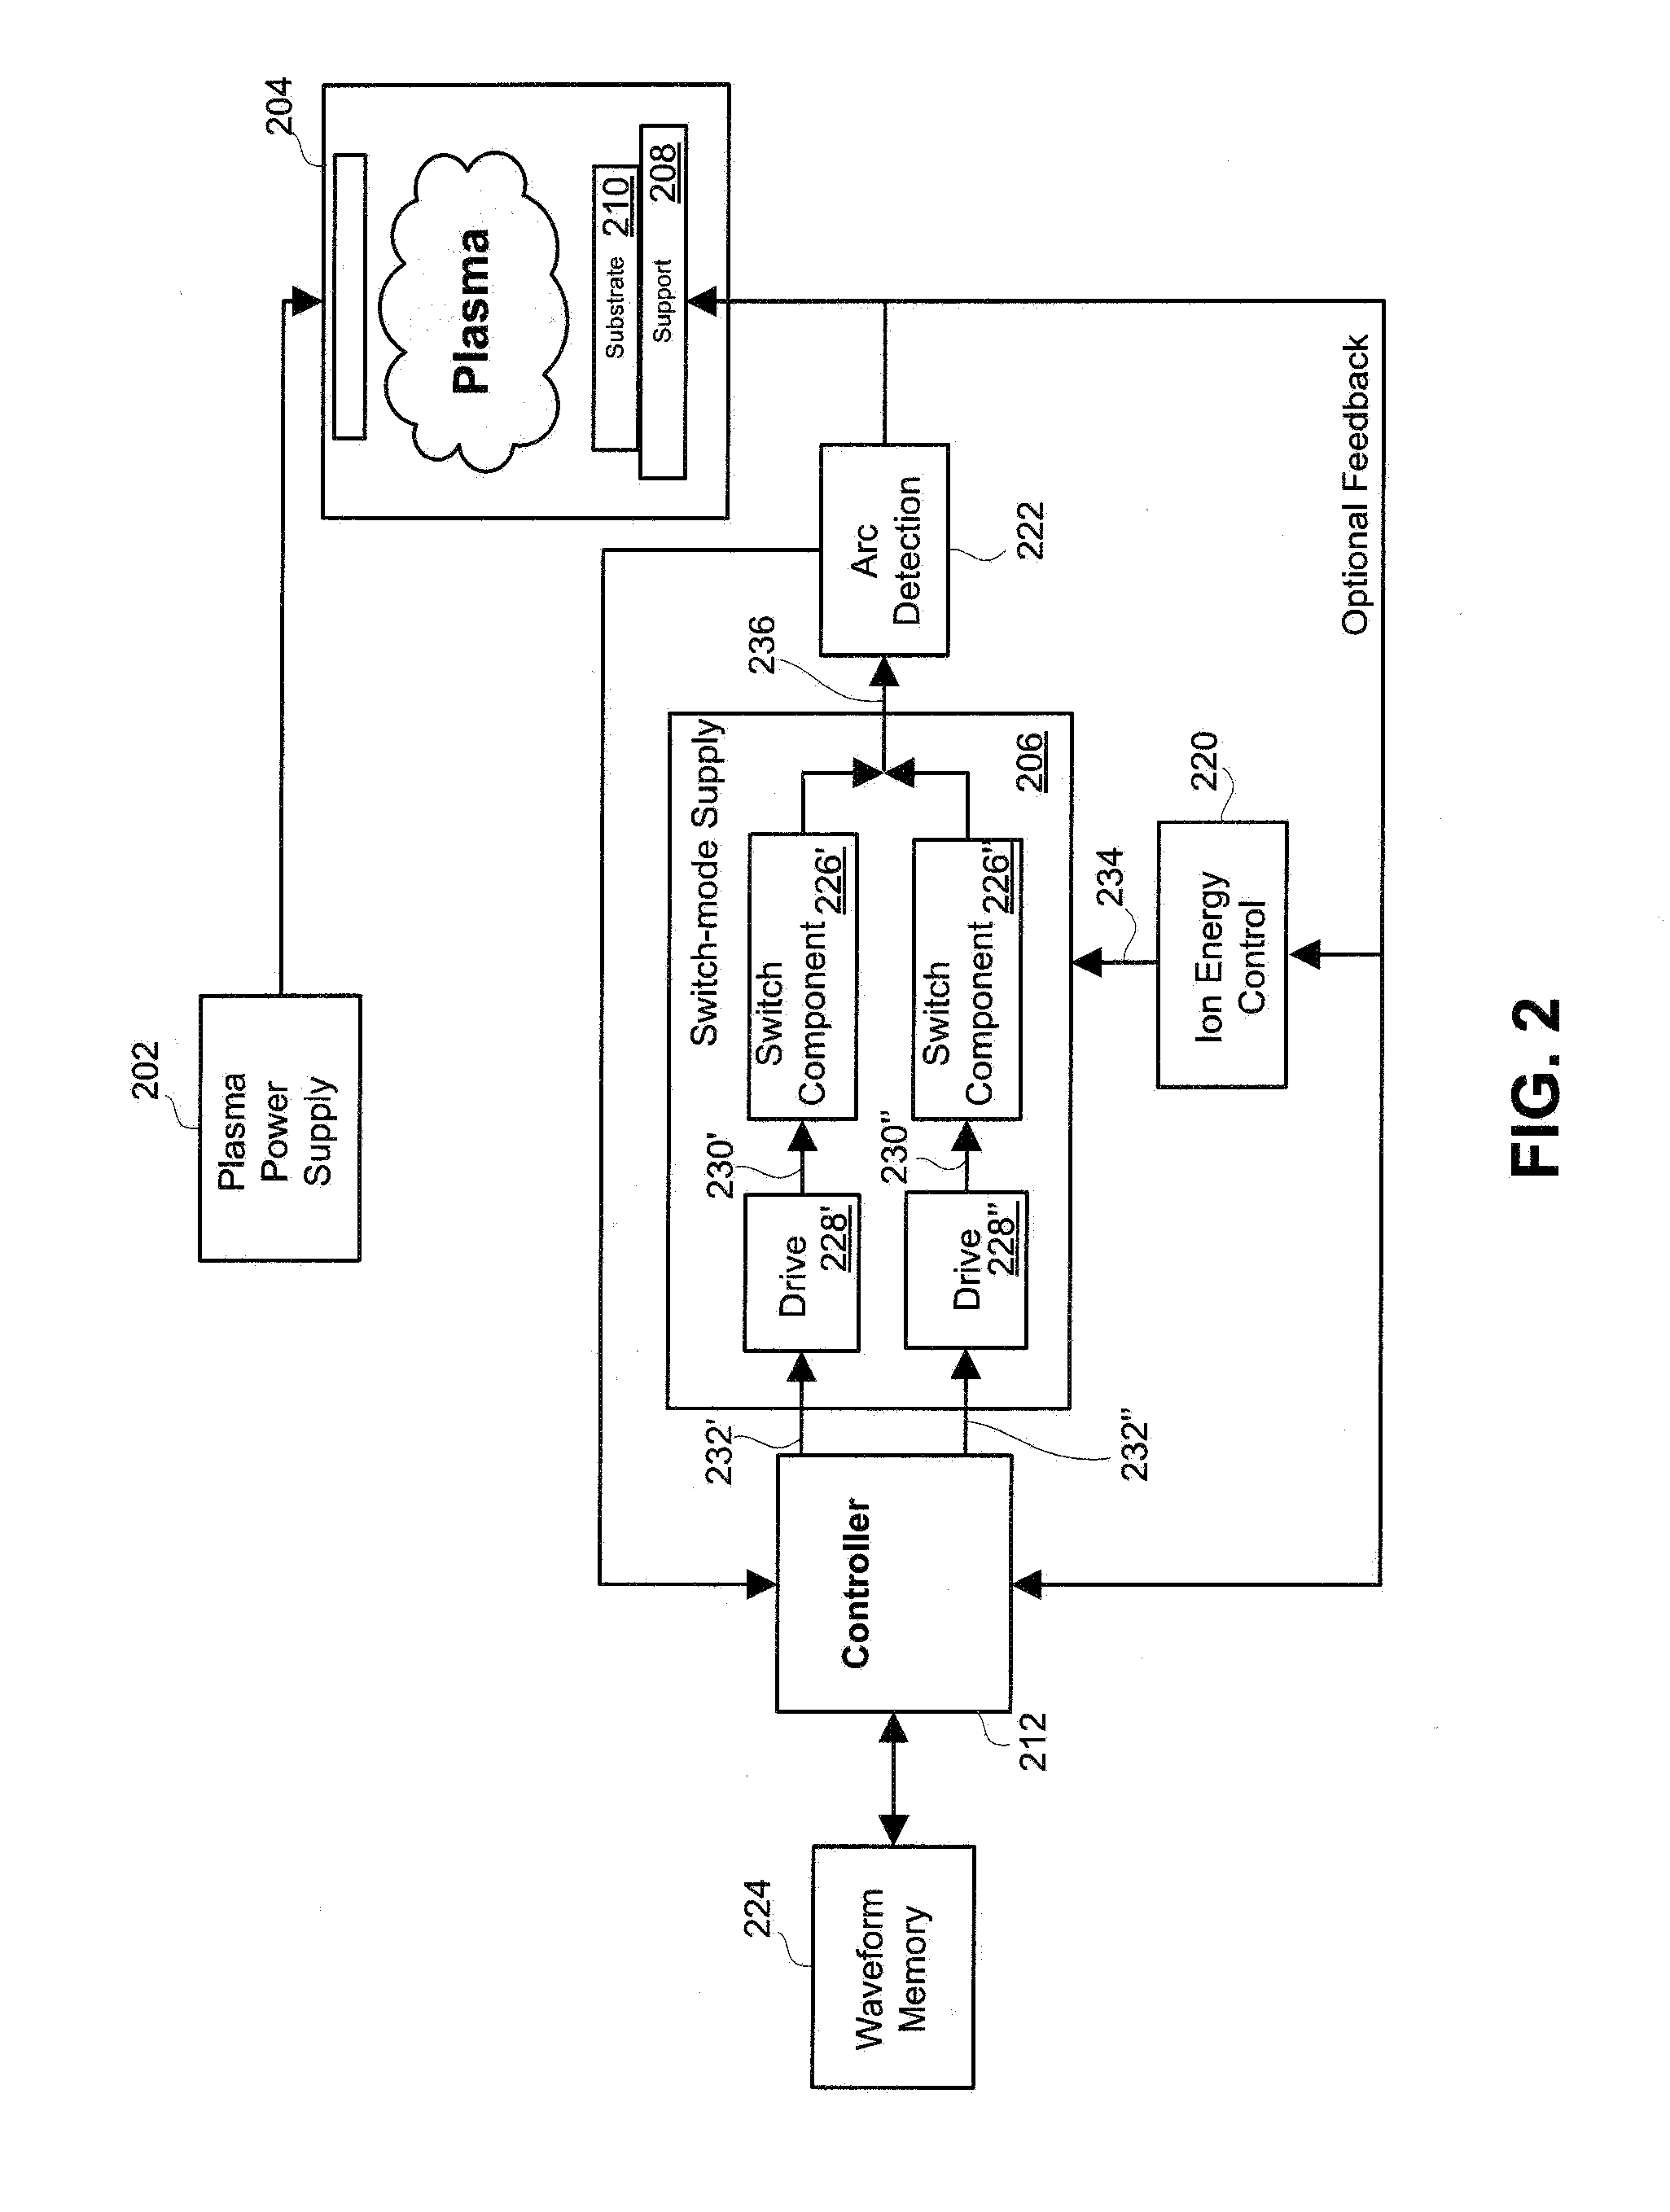 System, method and apparatus for controlling ion energy distribution